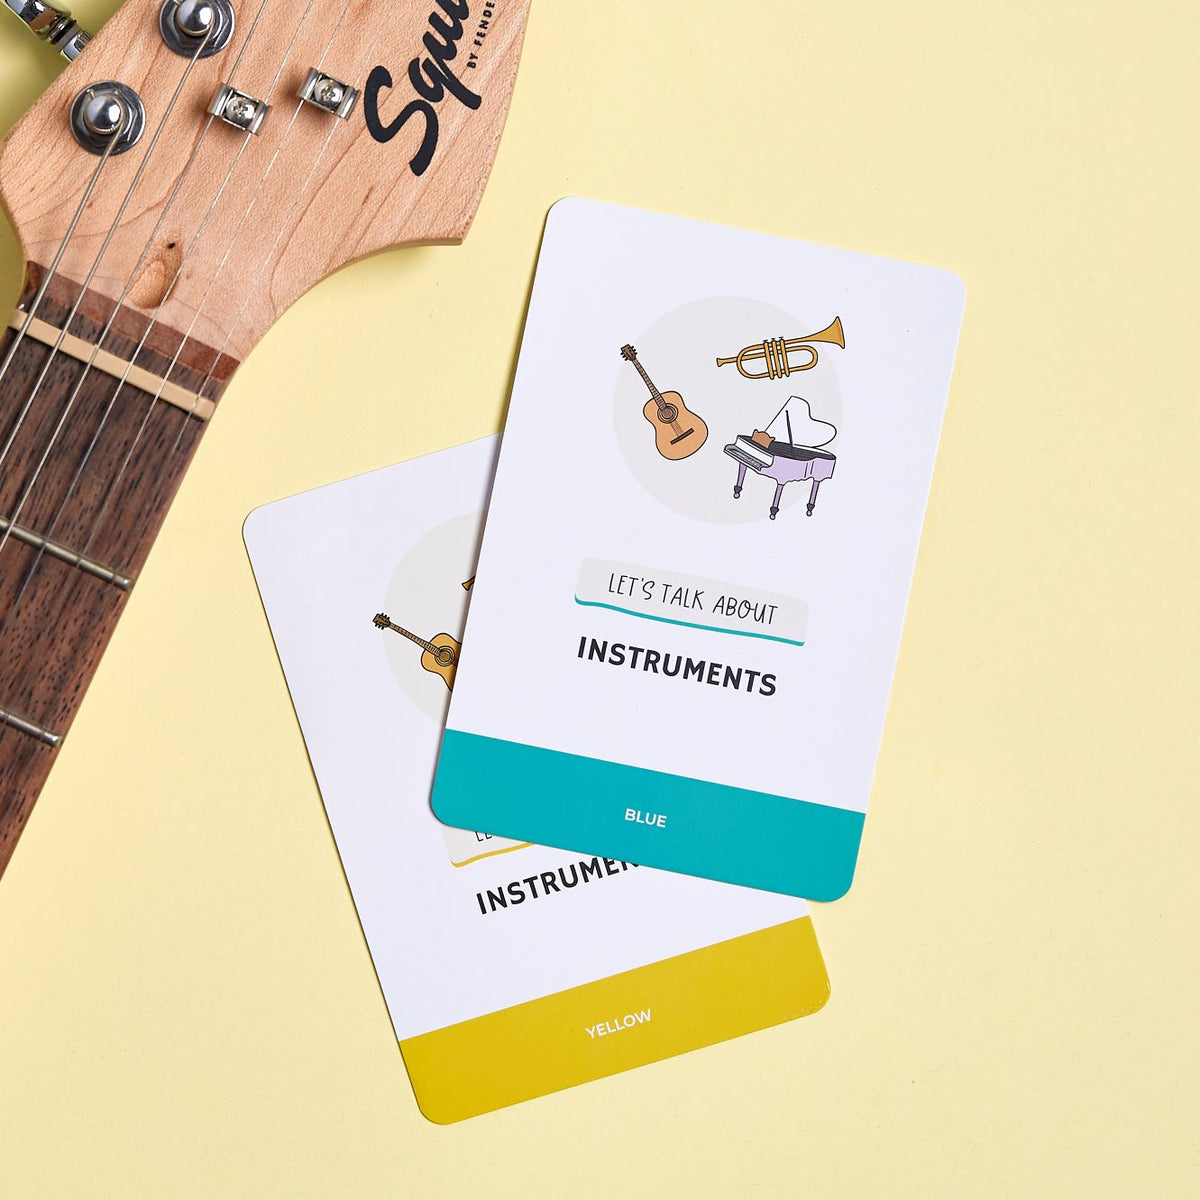 Topic card - lets talk about instruments, with a guitar next to it.